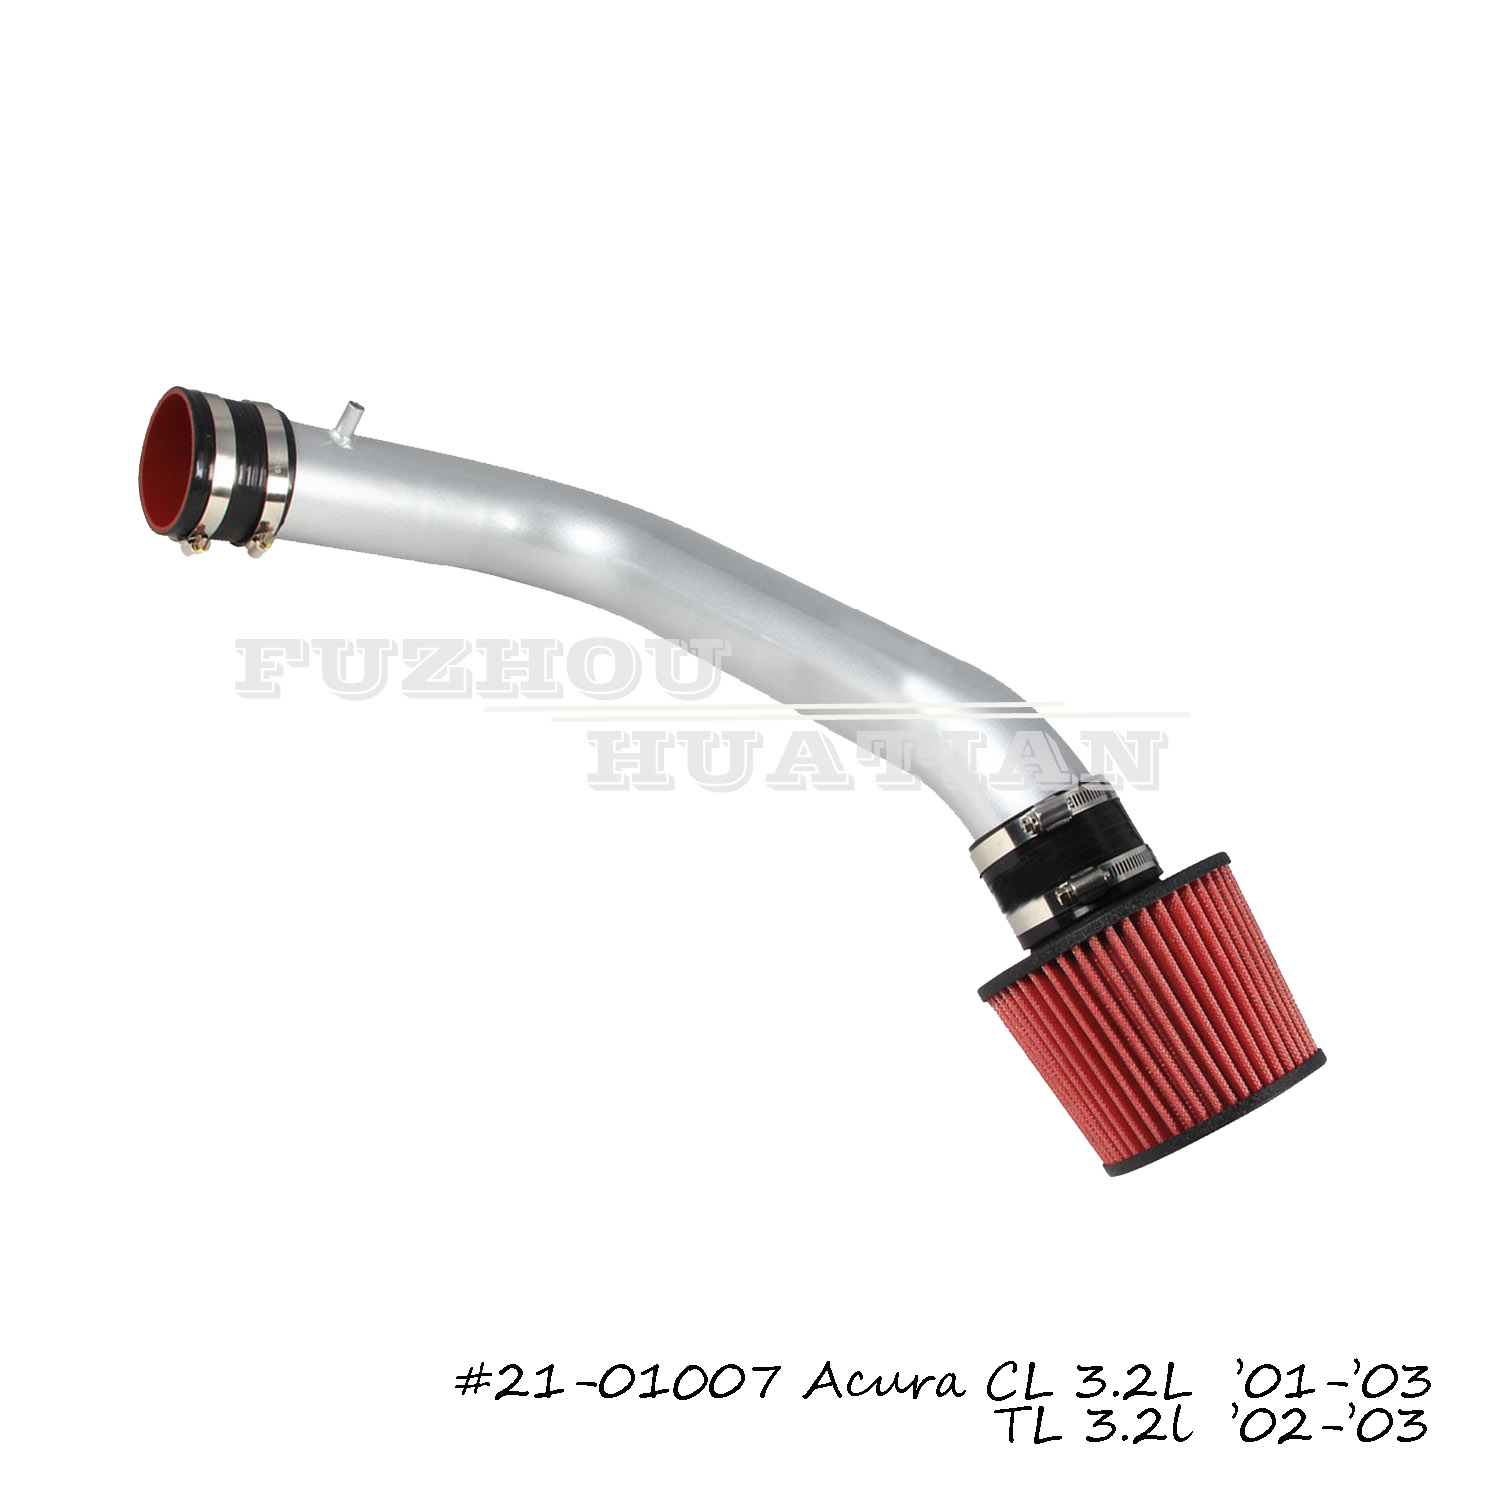 Cold Air Intake, Acura CL V6 3.2L 21-01007